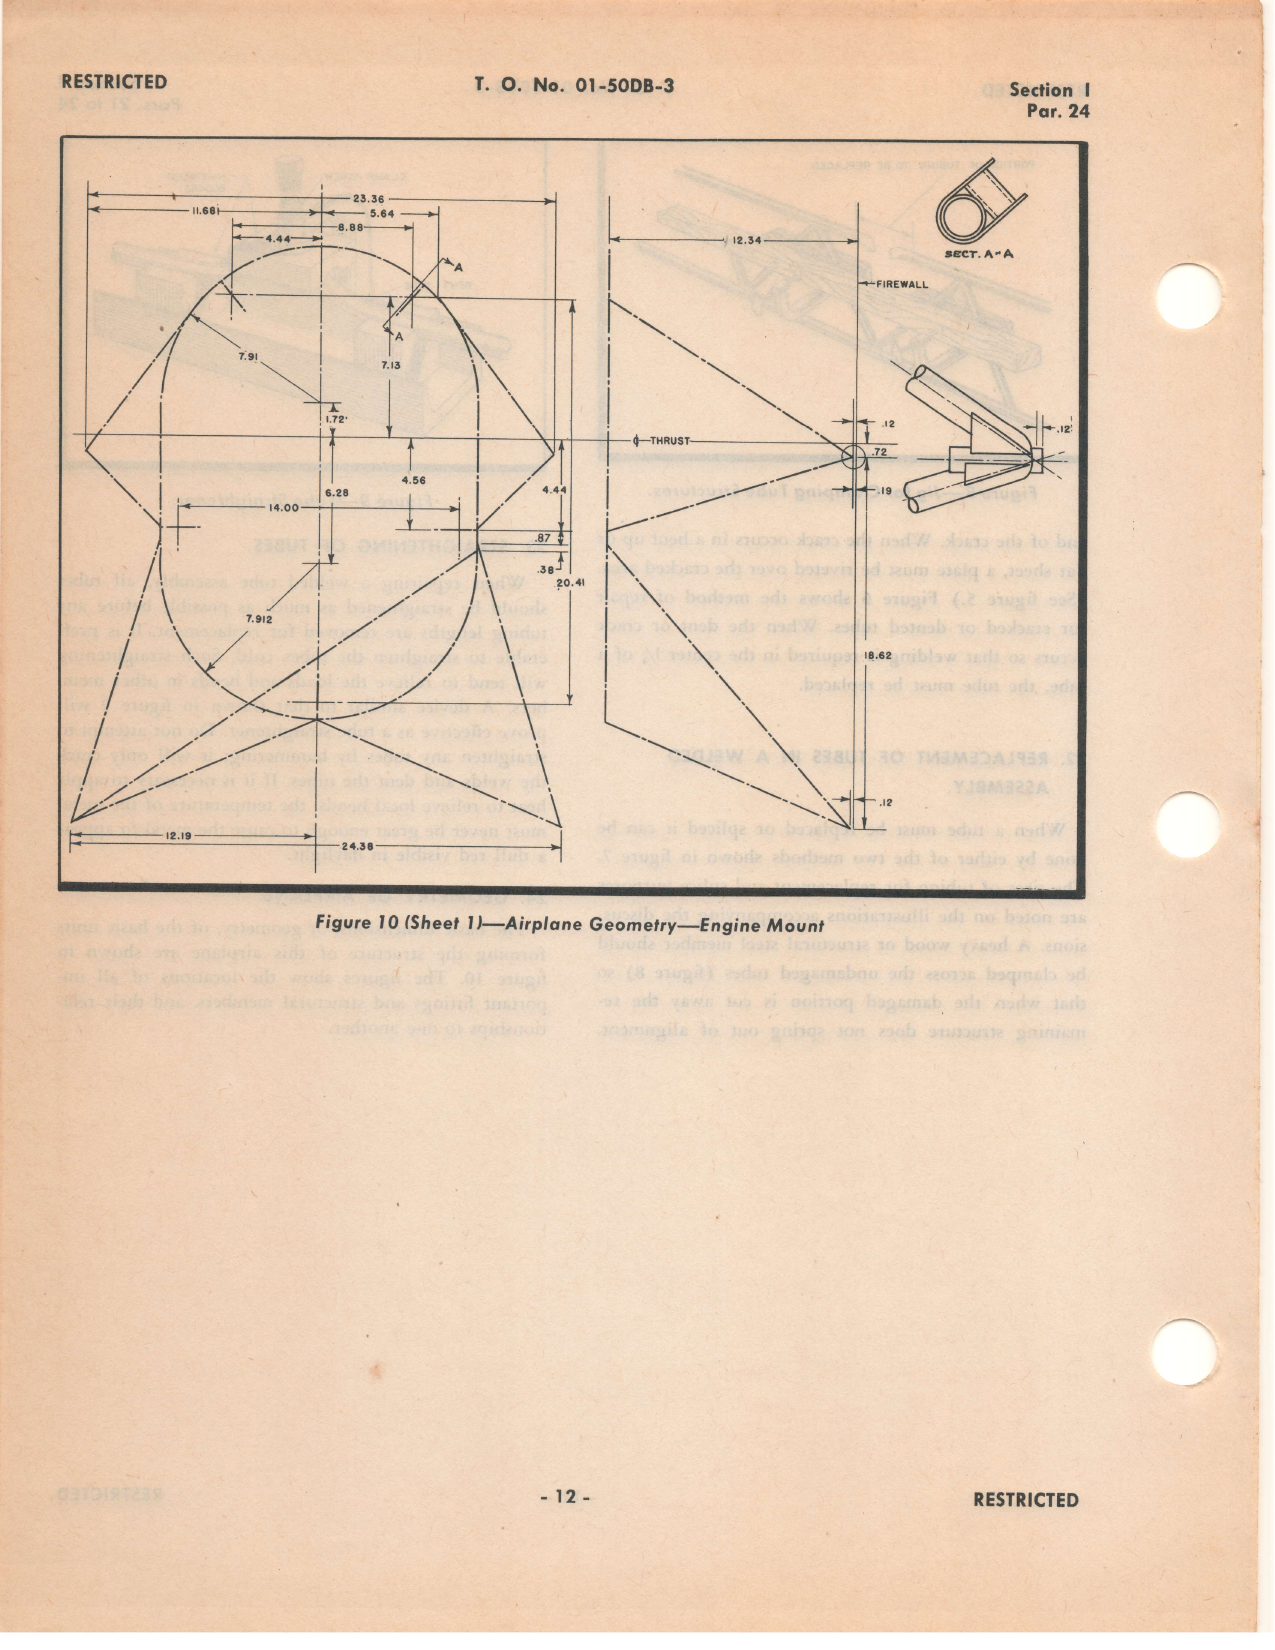 Sample page 18 from AirCorps Library document: Structural Repair Instructions - L-5